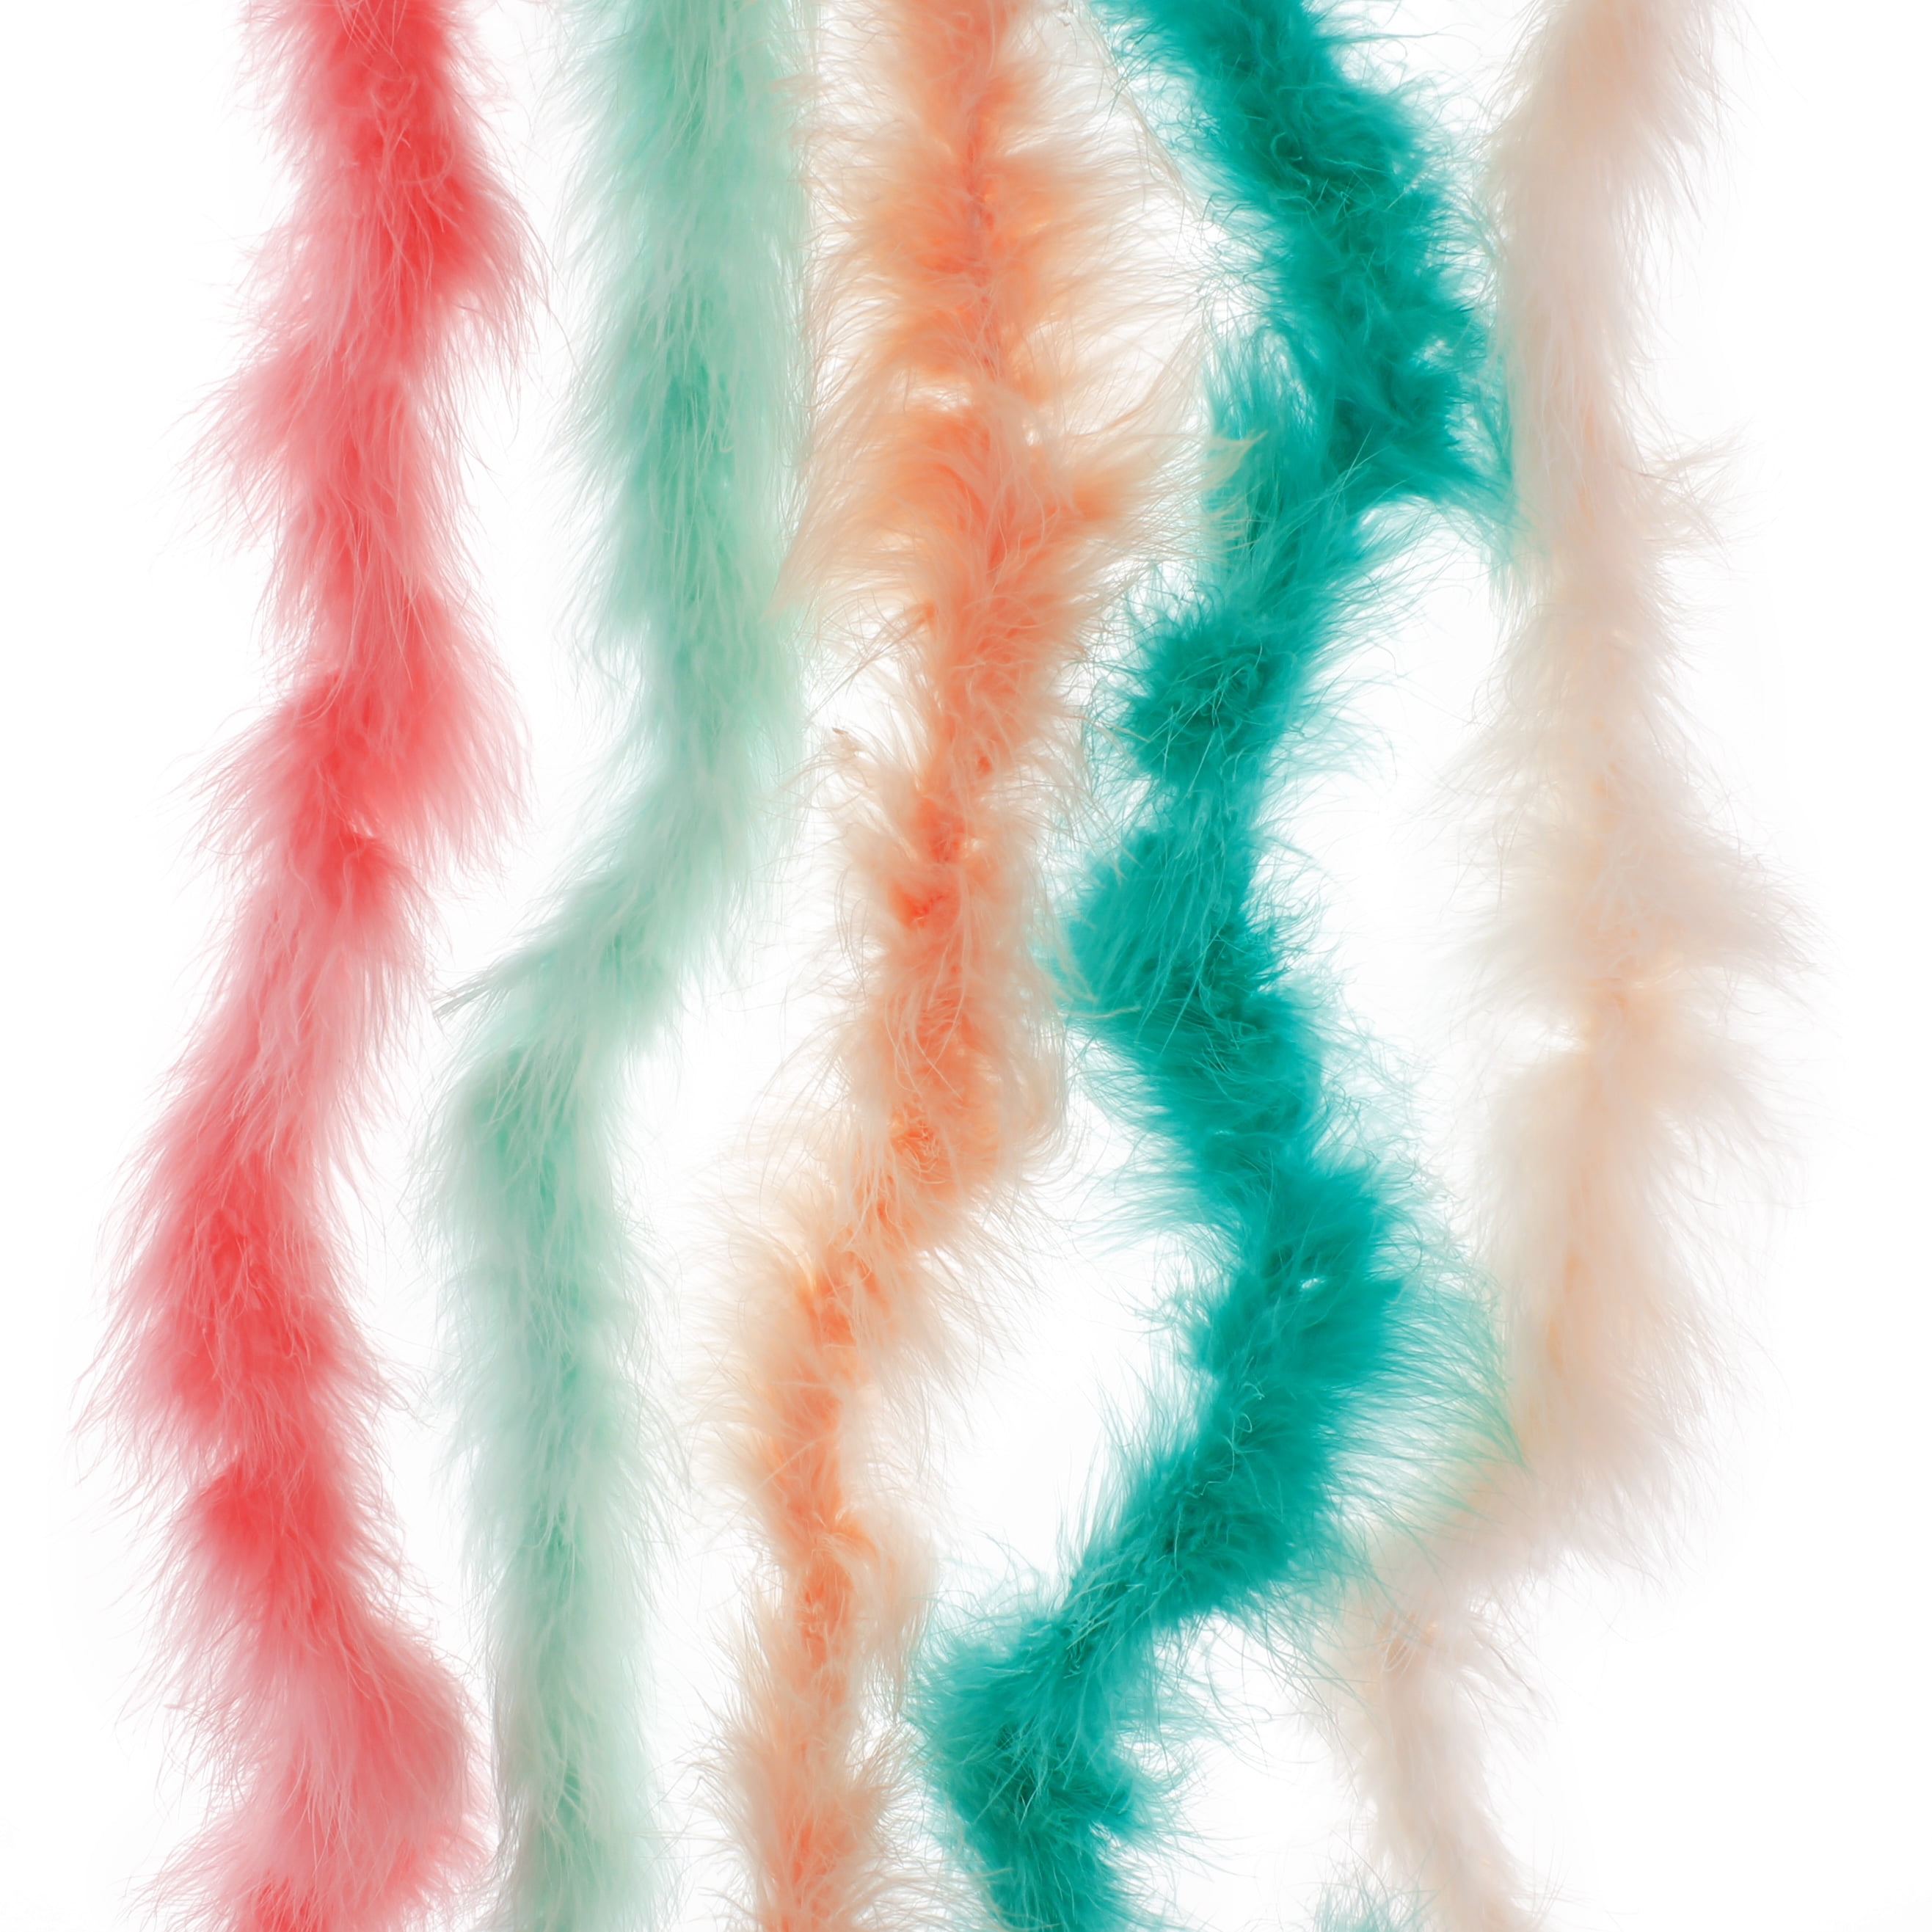 Full and Fluffy Marabou Feather Boa Modern Pastel Colors Variety Pack 2  Yard Lengths - 5pcs 